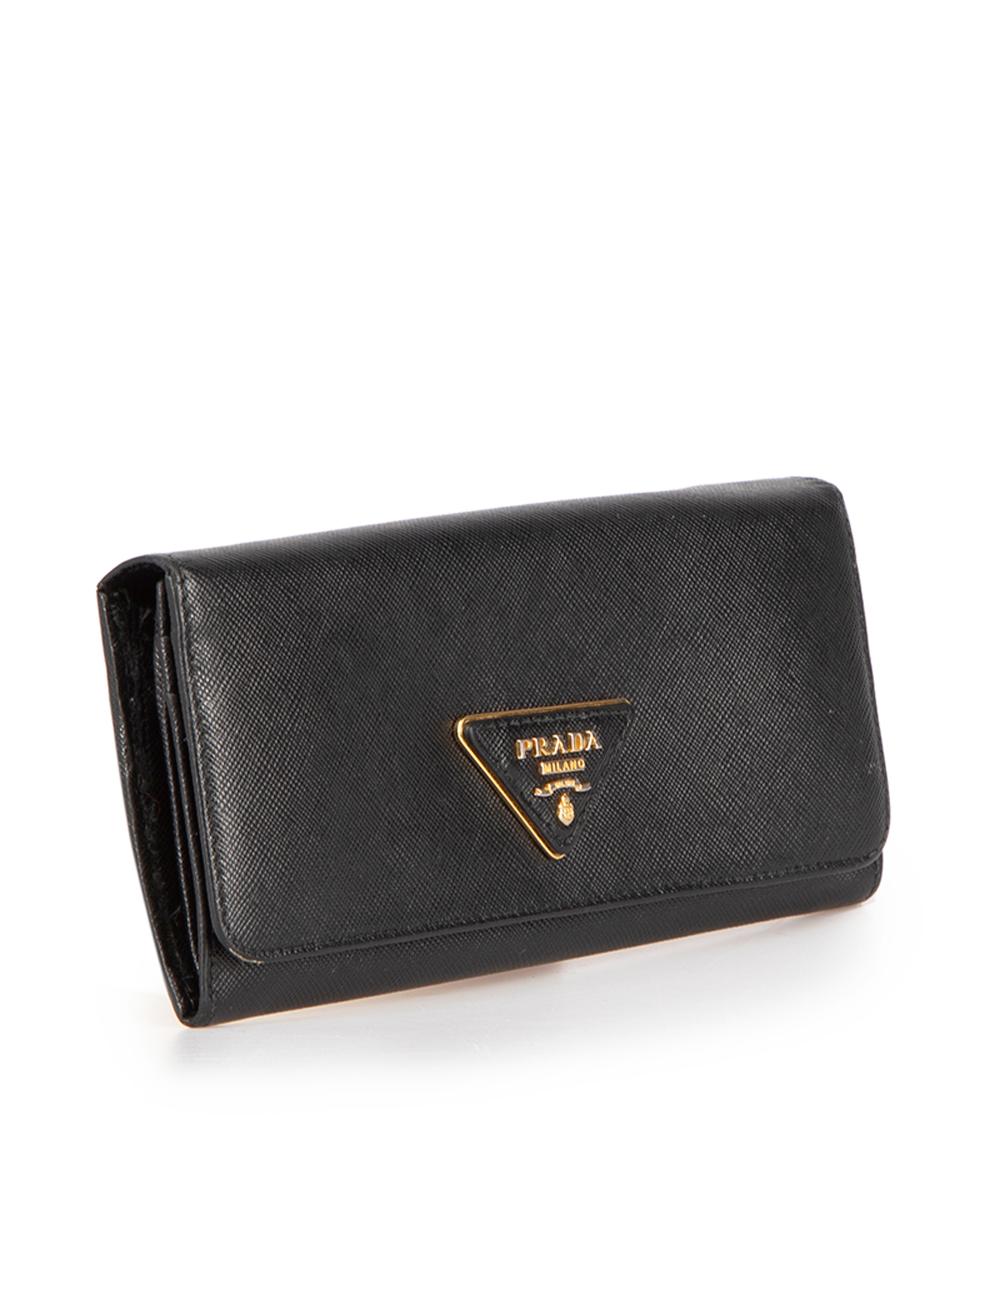 CONDITION is Very good. Minimal wear to wallet is evident. Minimal scratch mark is visible to the interior leather on this used Prada designer resale item. This item comes with original box and dust bag. Please note that left side seam has been